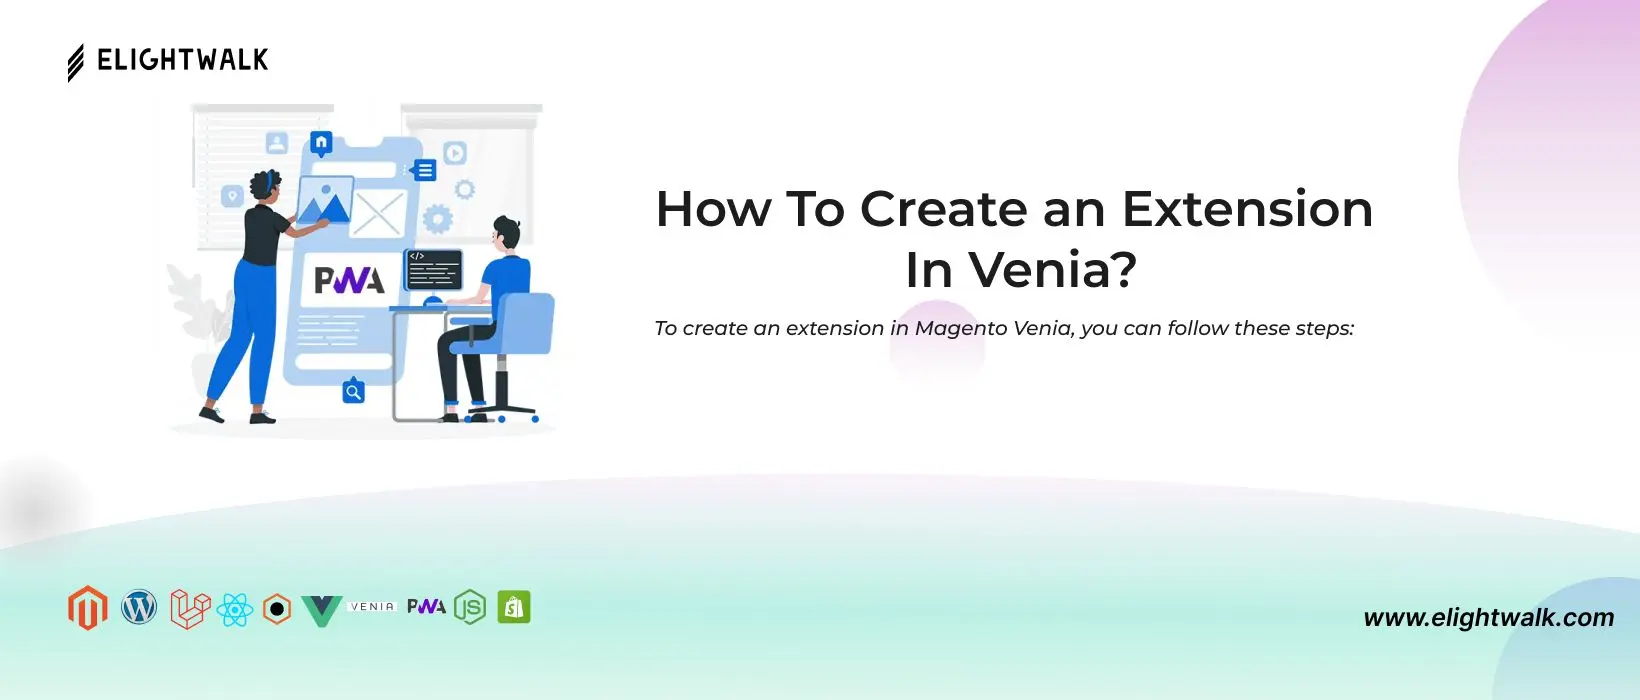 How To Create an Extension In Venia?